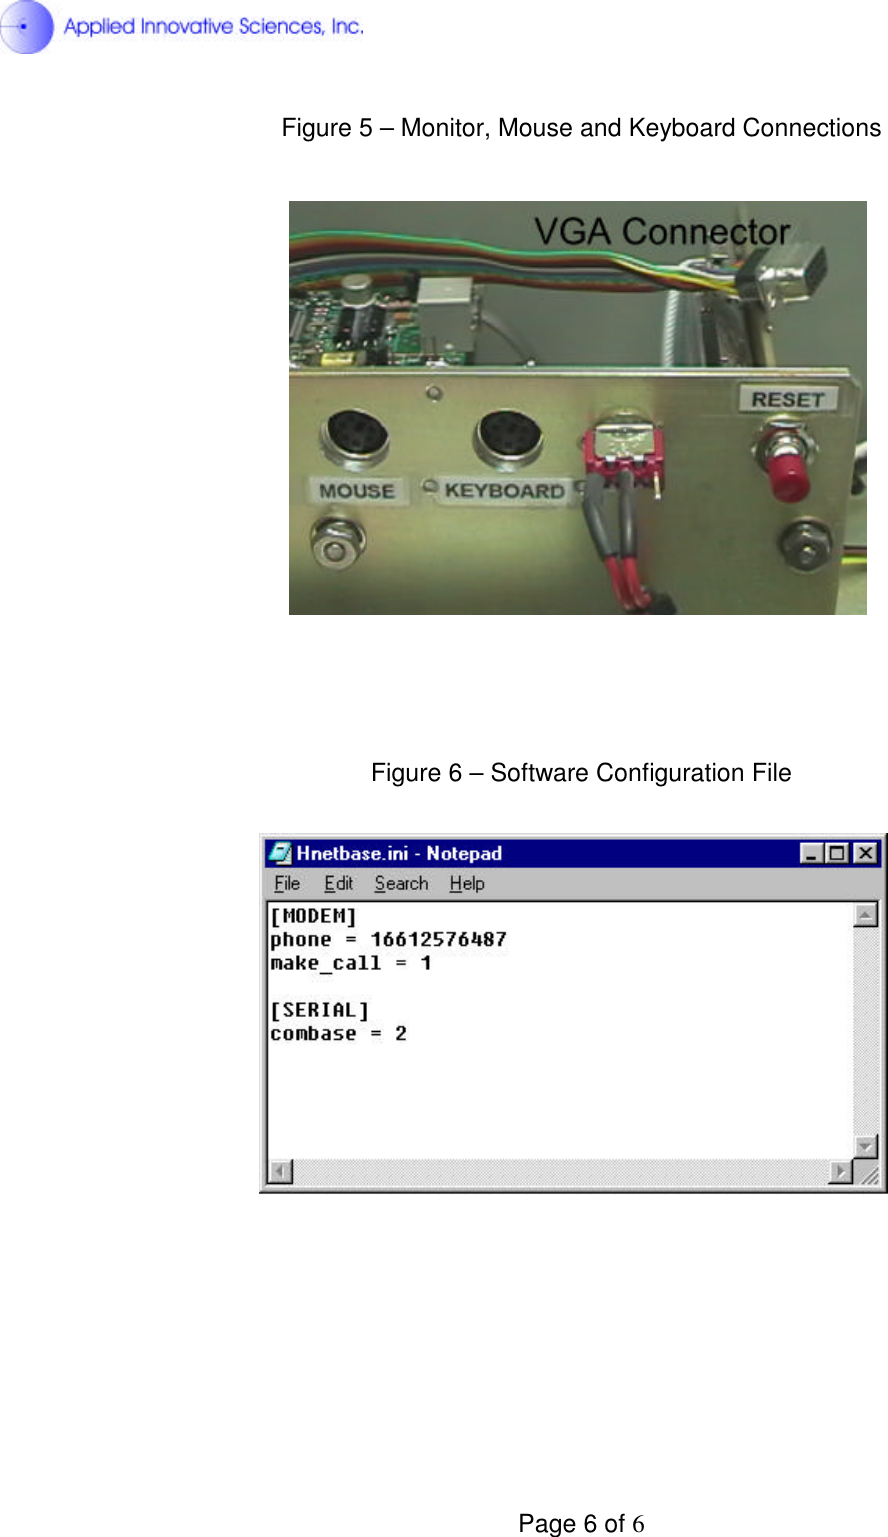  Page 6 of 6 Figure 5 – Monitor, Mouse and Keyboard Connections        Figure 6 – Software Configuration File   